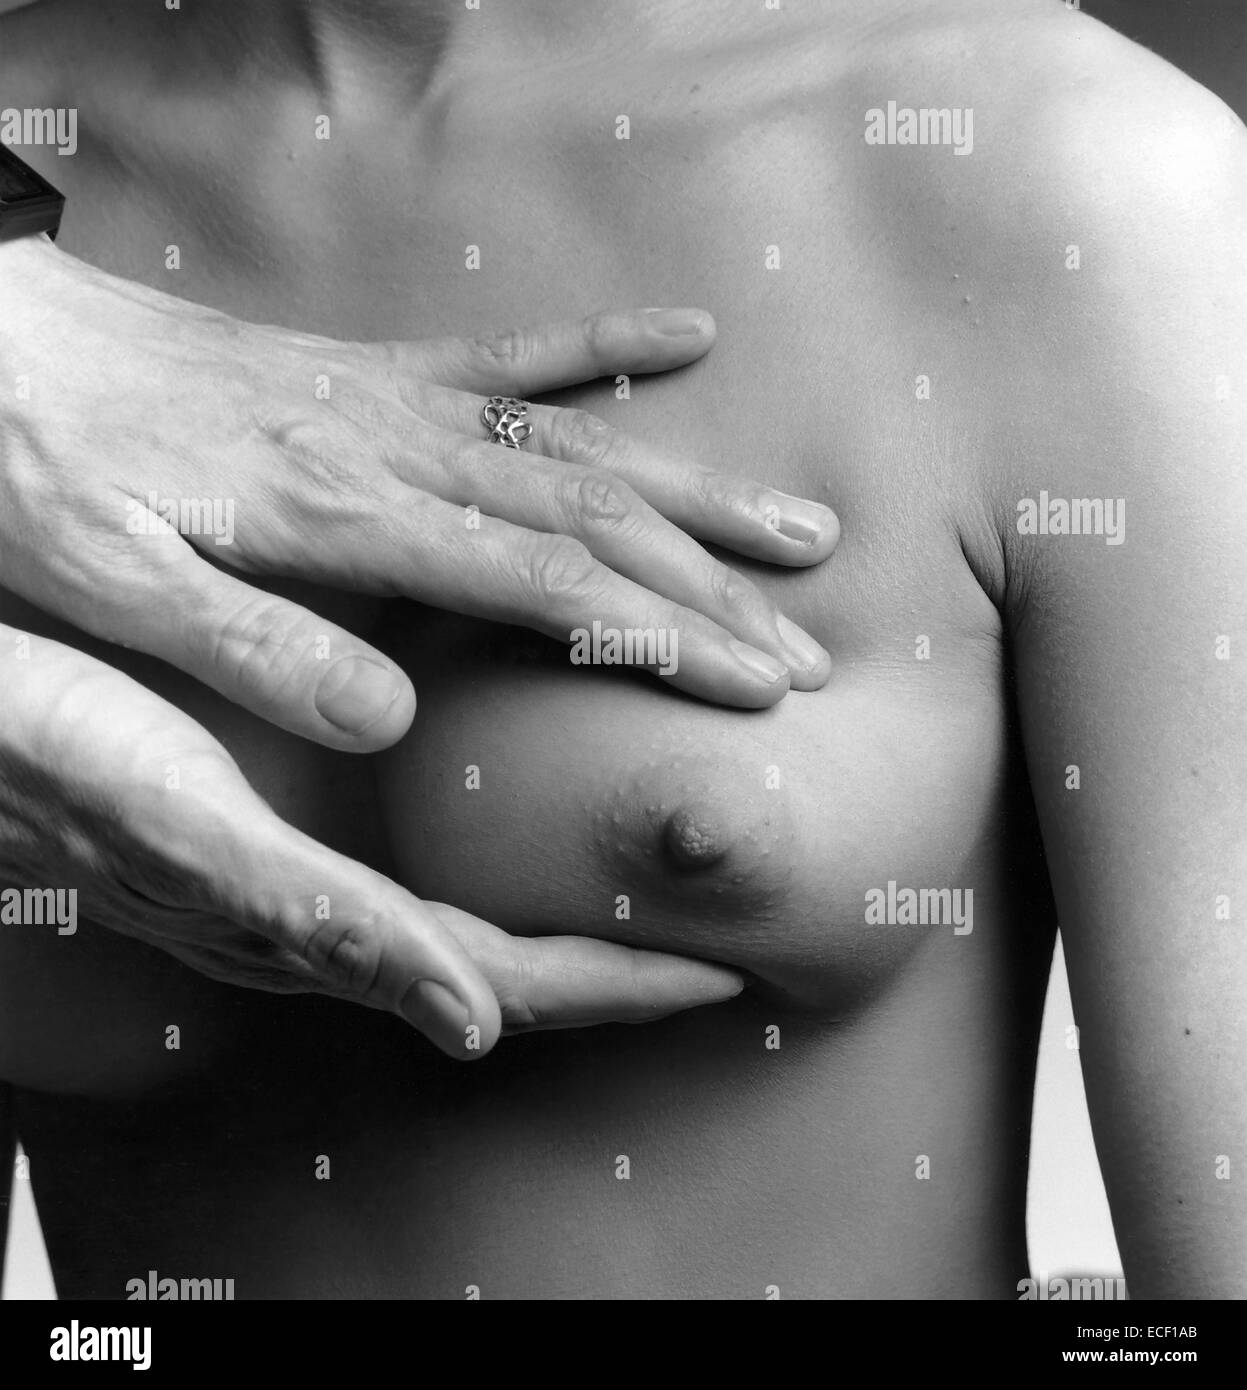 A female nude from the waist up with a doctors hands conducting a clinical breast examination. Stock Photo